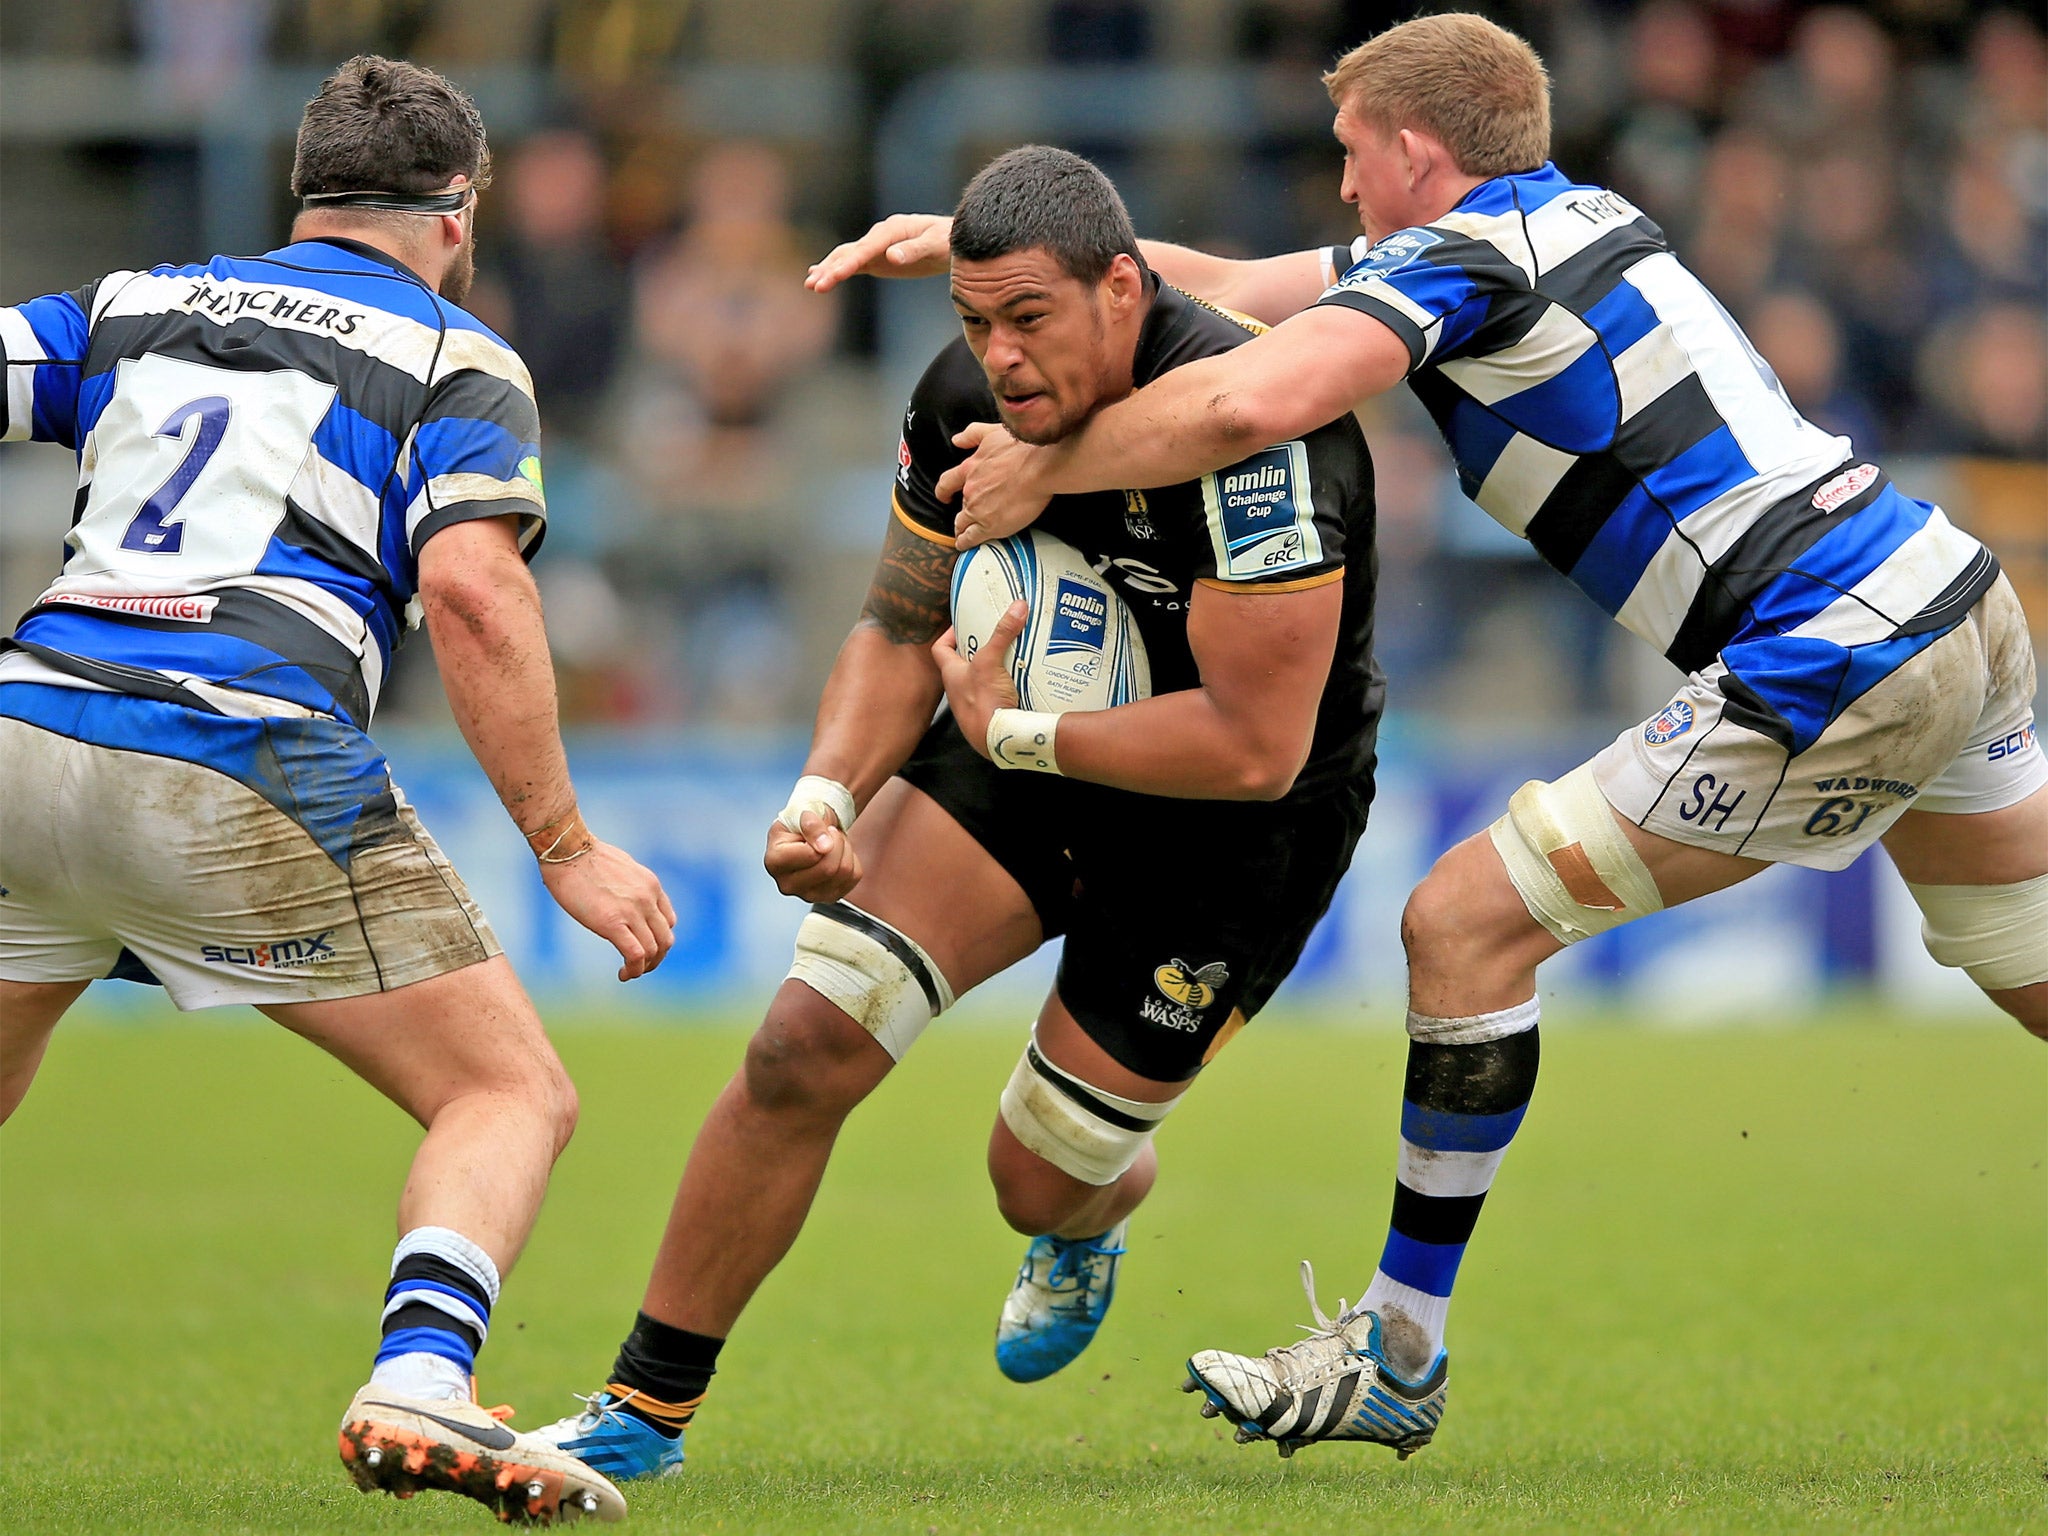 Wasps’ Fijian-born No 8 Nathan Hughes will be eligible for England in 2016